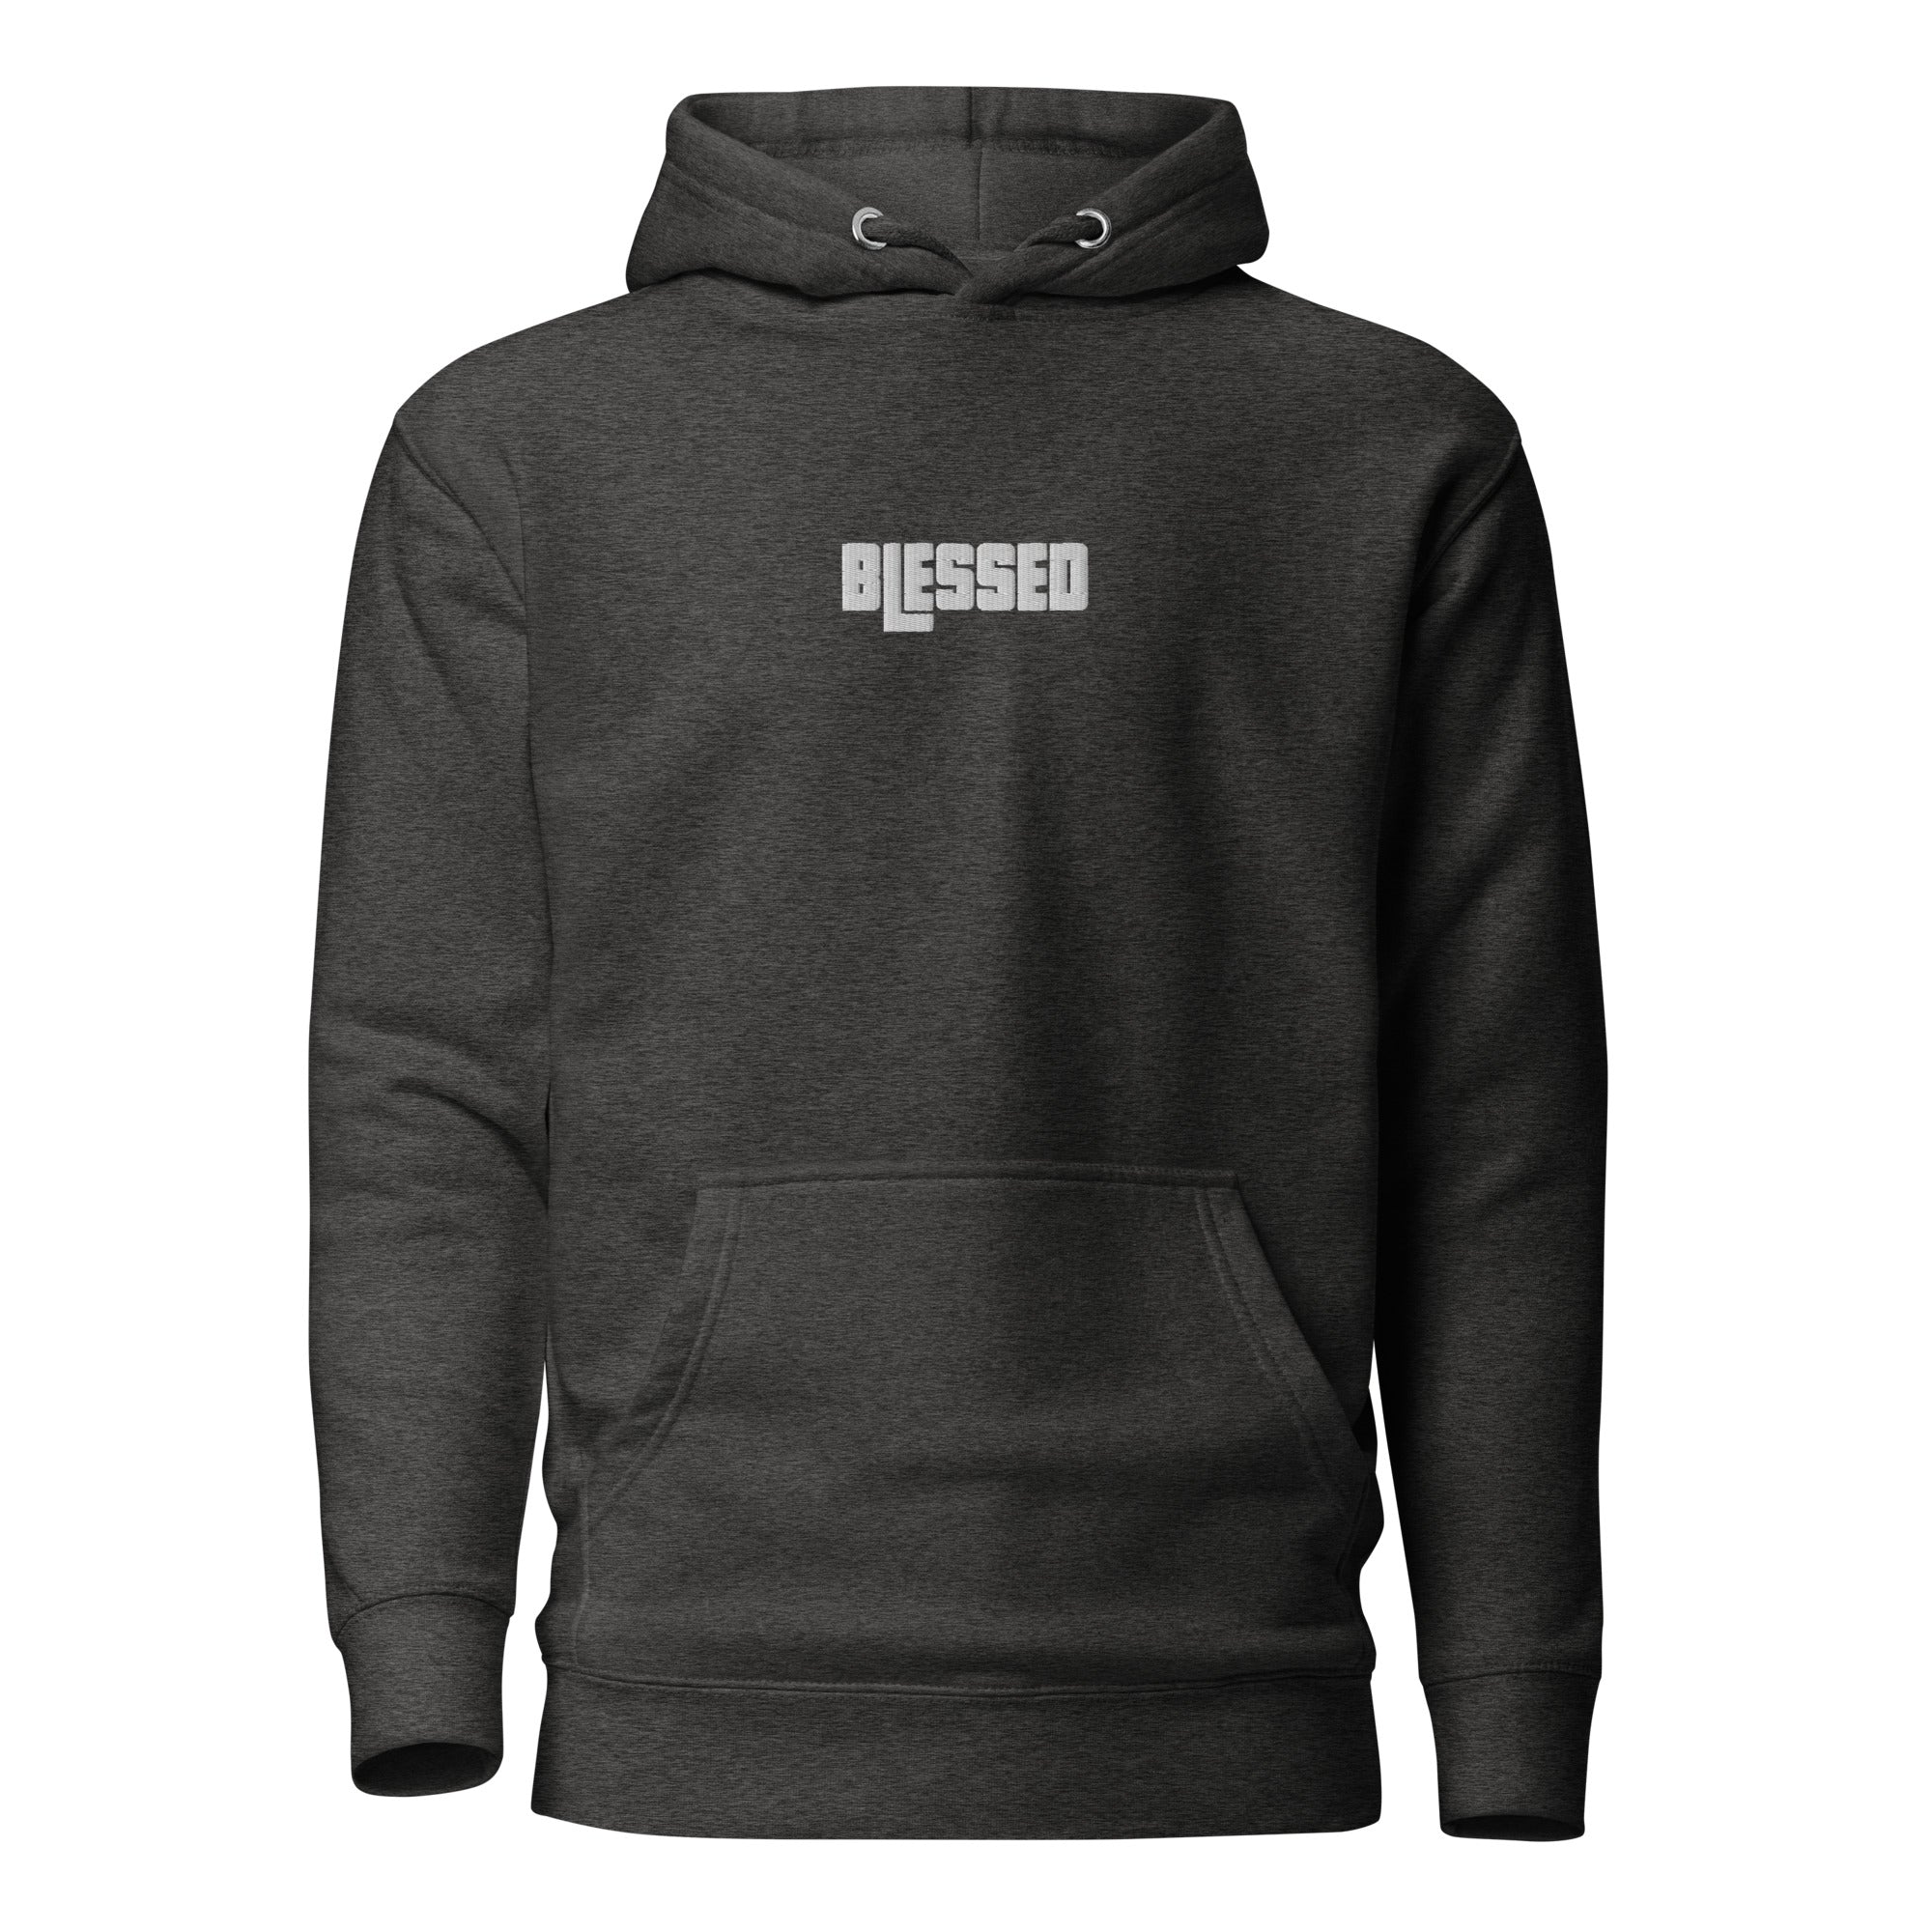 Blessed White Center Embroidered Unisex Hoodie